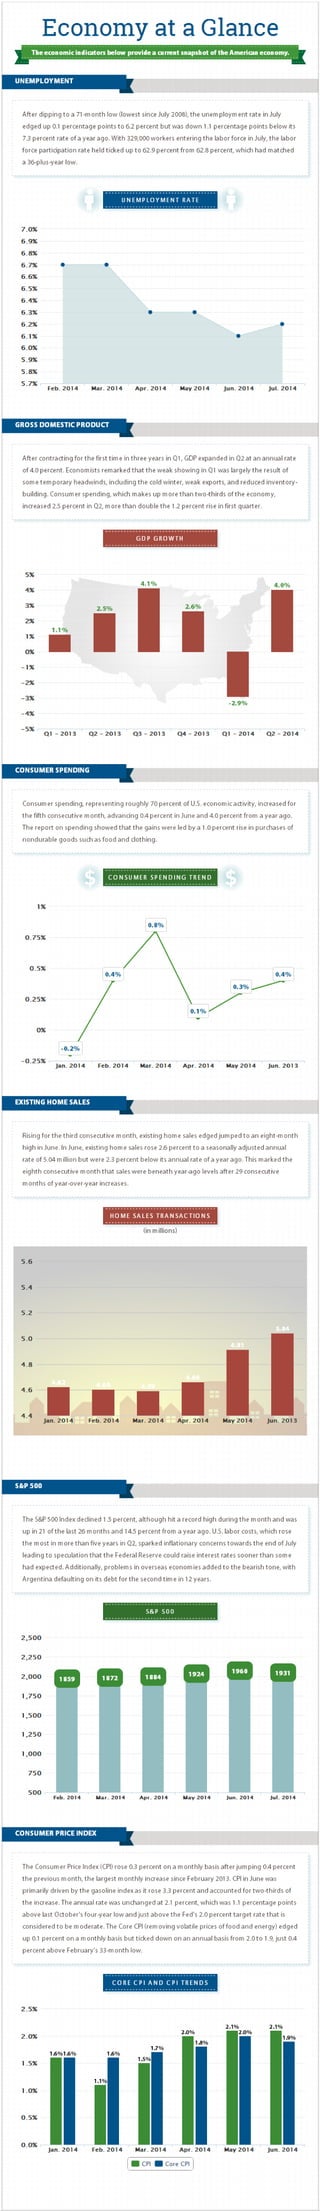 Economy at a Glance: August 2014 [Infographic]